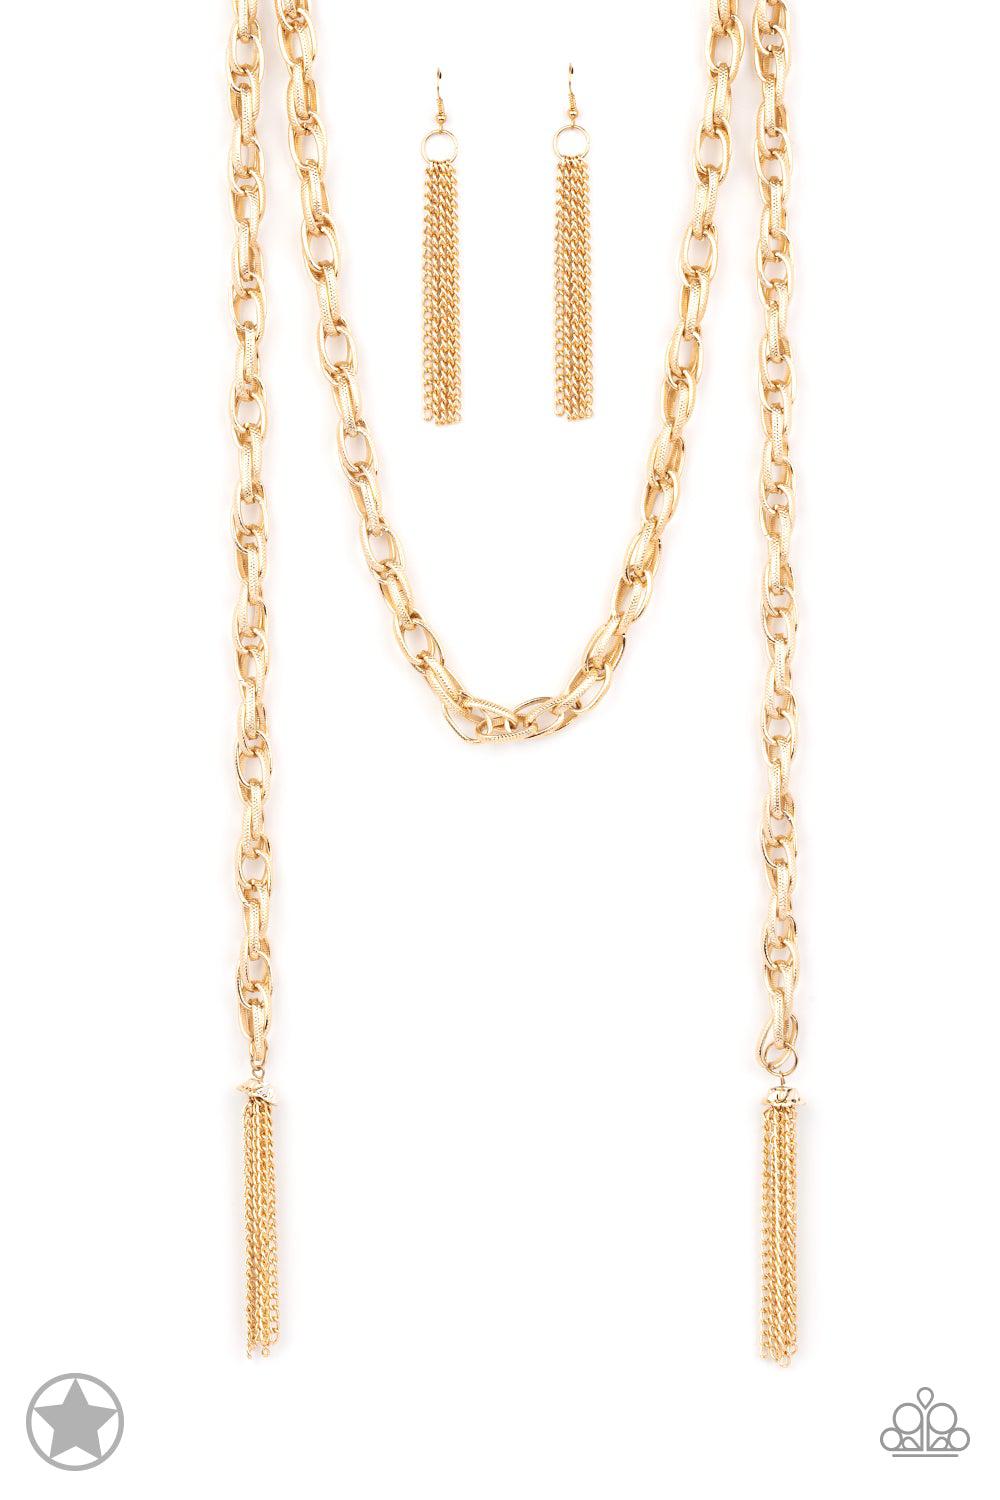 Scarfed for Attention Gold Chain Necklace and matching Earrings - Paparazzi Accessories - lightbox -CarasShop.com - $5 Jewelry by Cara Jewels